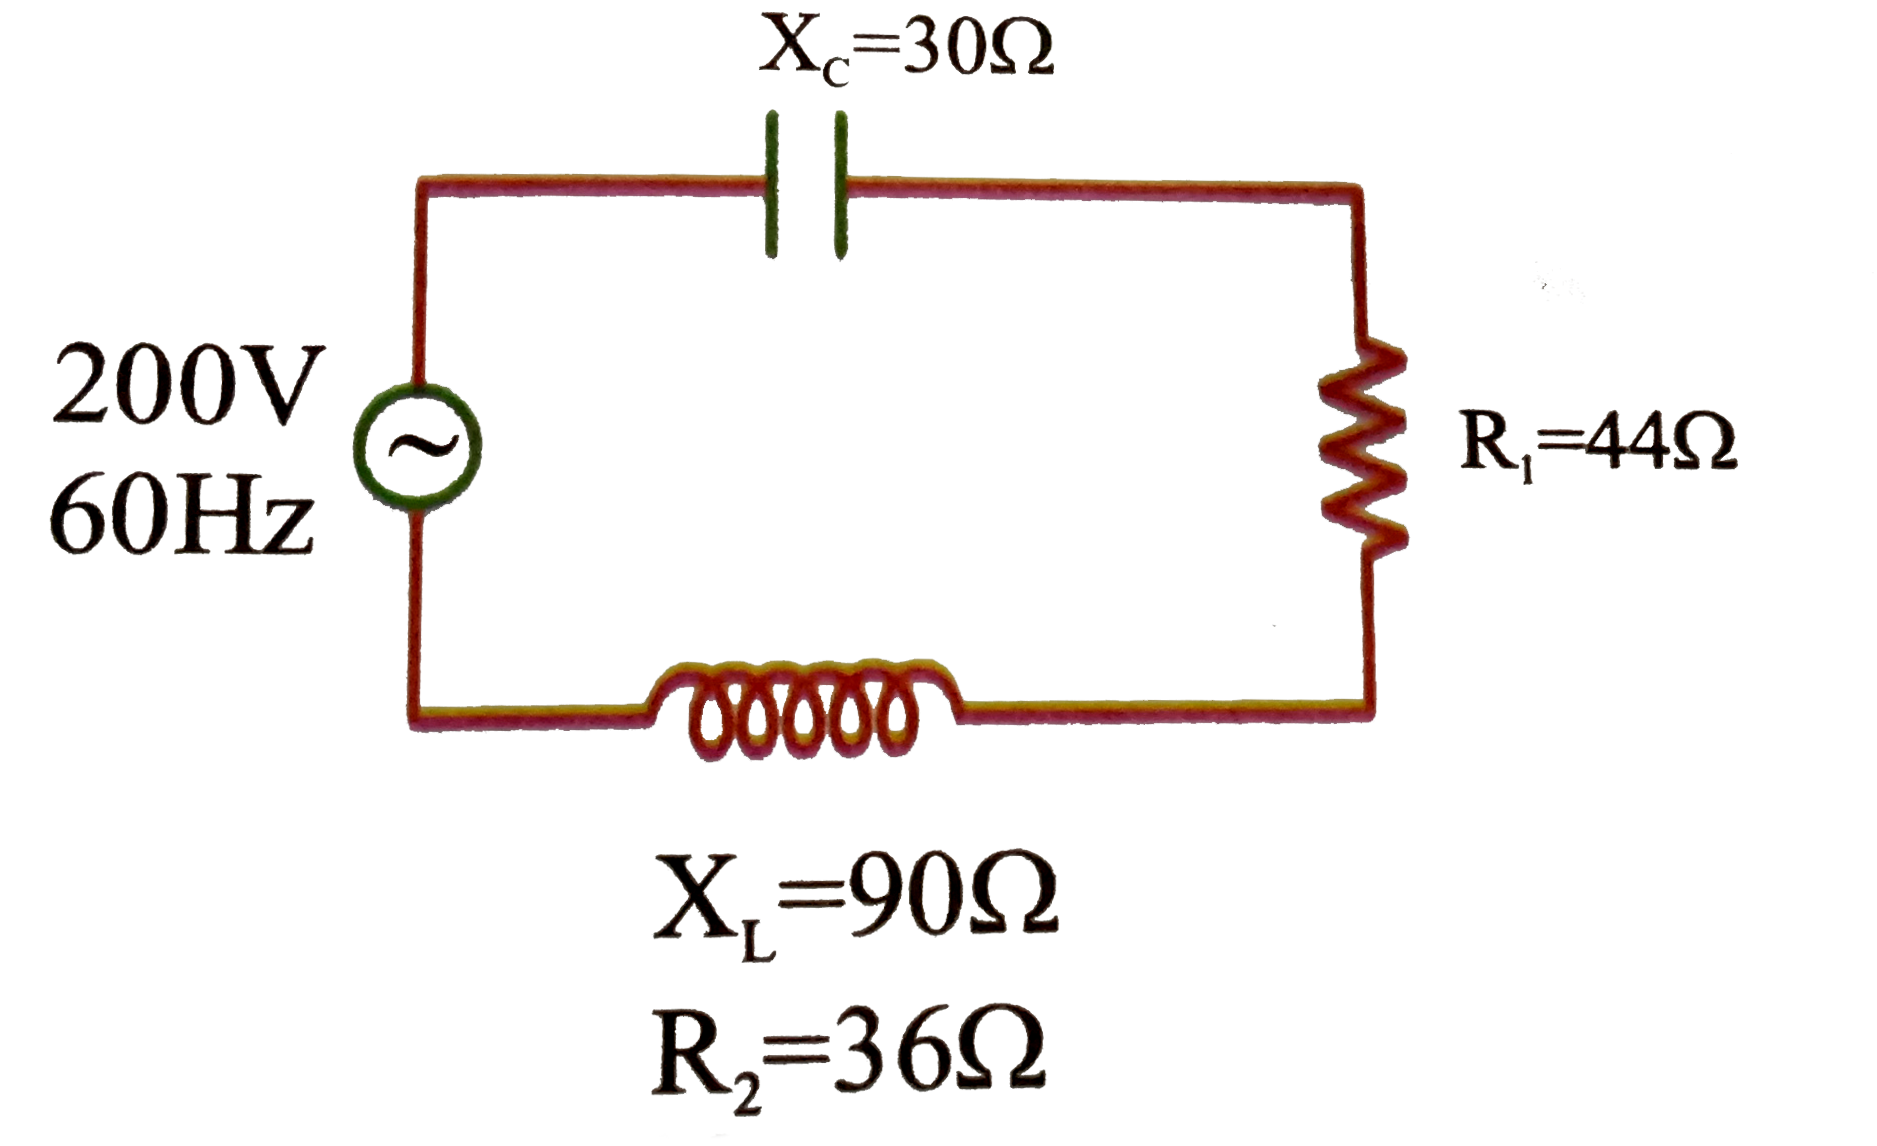 A series circuit connected across a 200 V, 60 Hz line consists of a capacitive reactance 30 Omega non inductive resistor of 44 Omega and a coil of inductive reactance 90 Omega and resistance 36 Omega as shown in the diagram       The power used in the circuit is